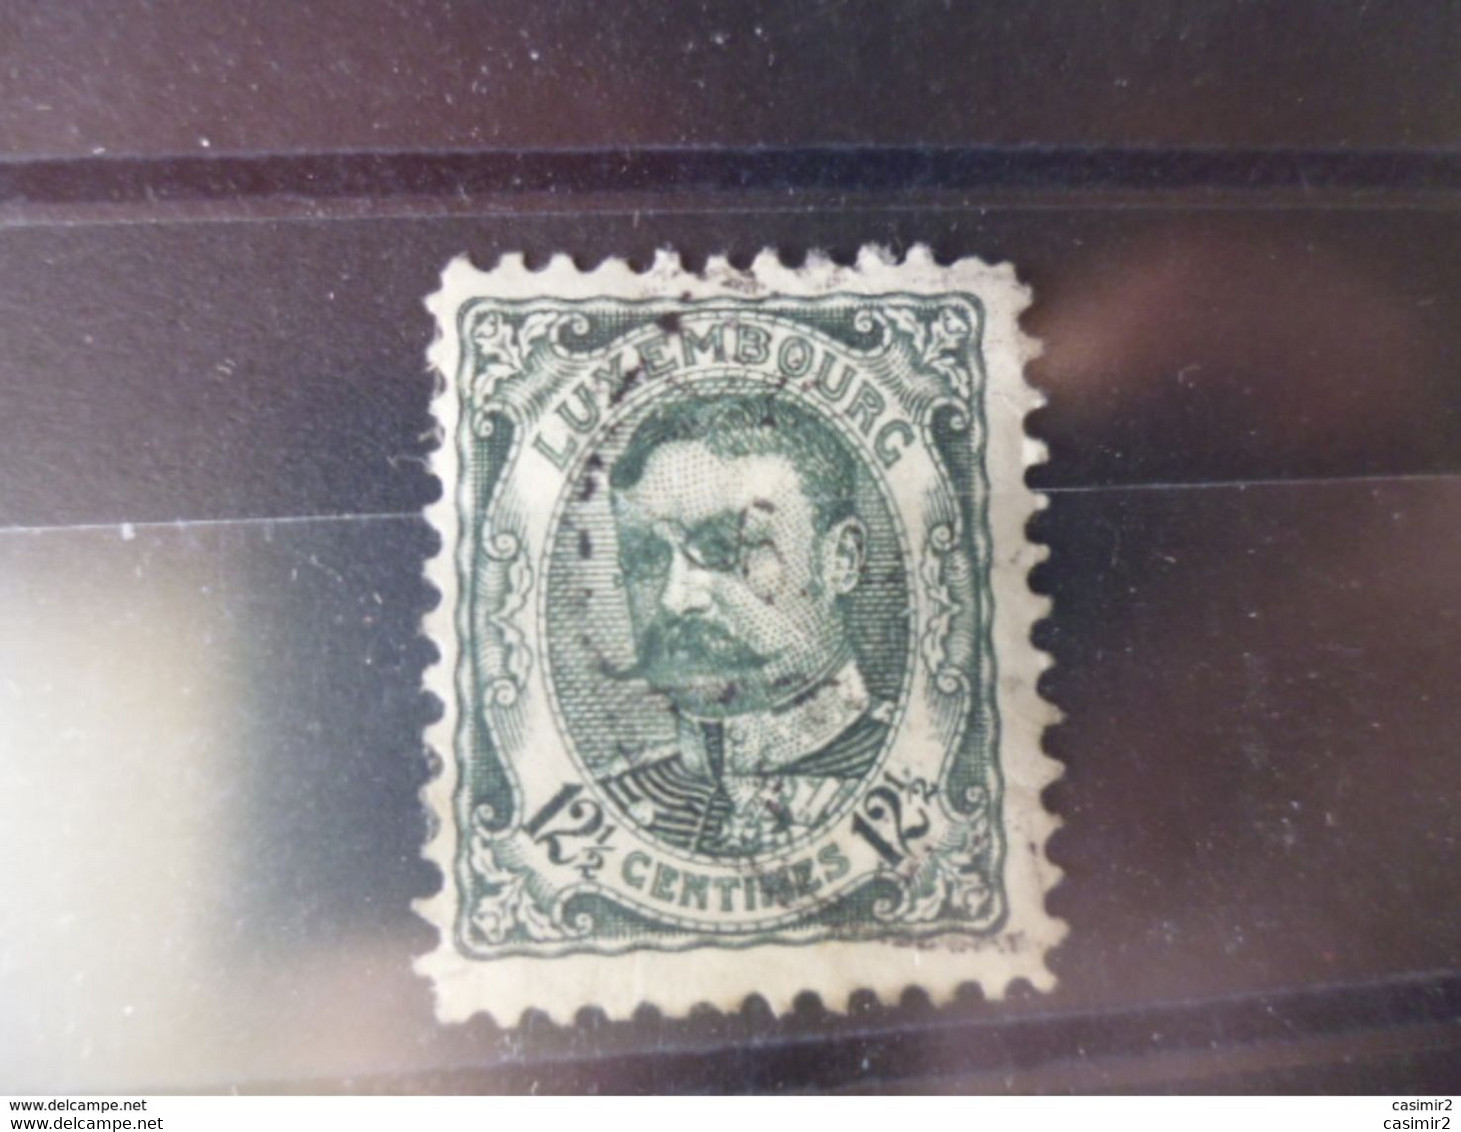 LUXEMBOURG TIMBRE YVERT N° 75 - 1906 William IV